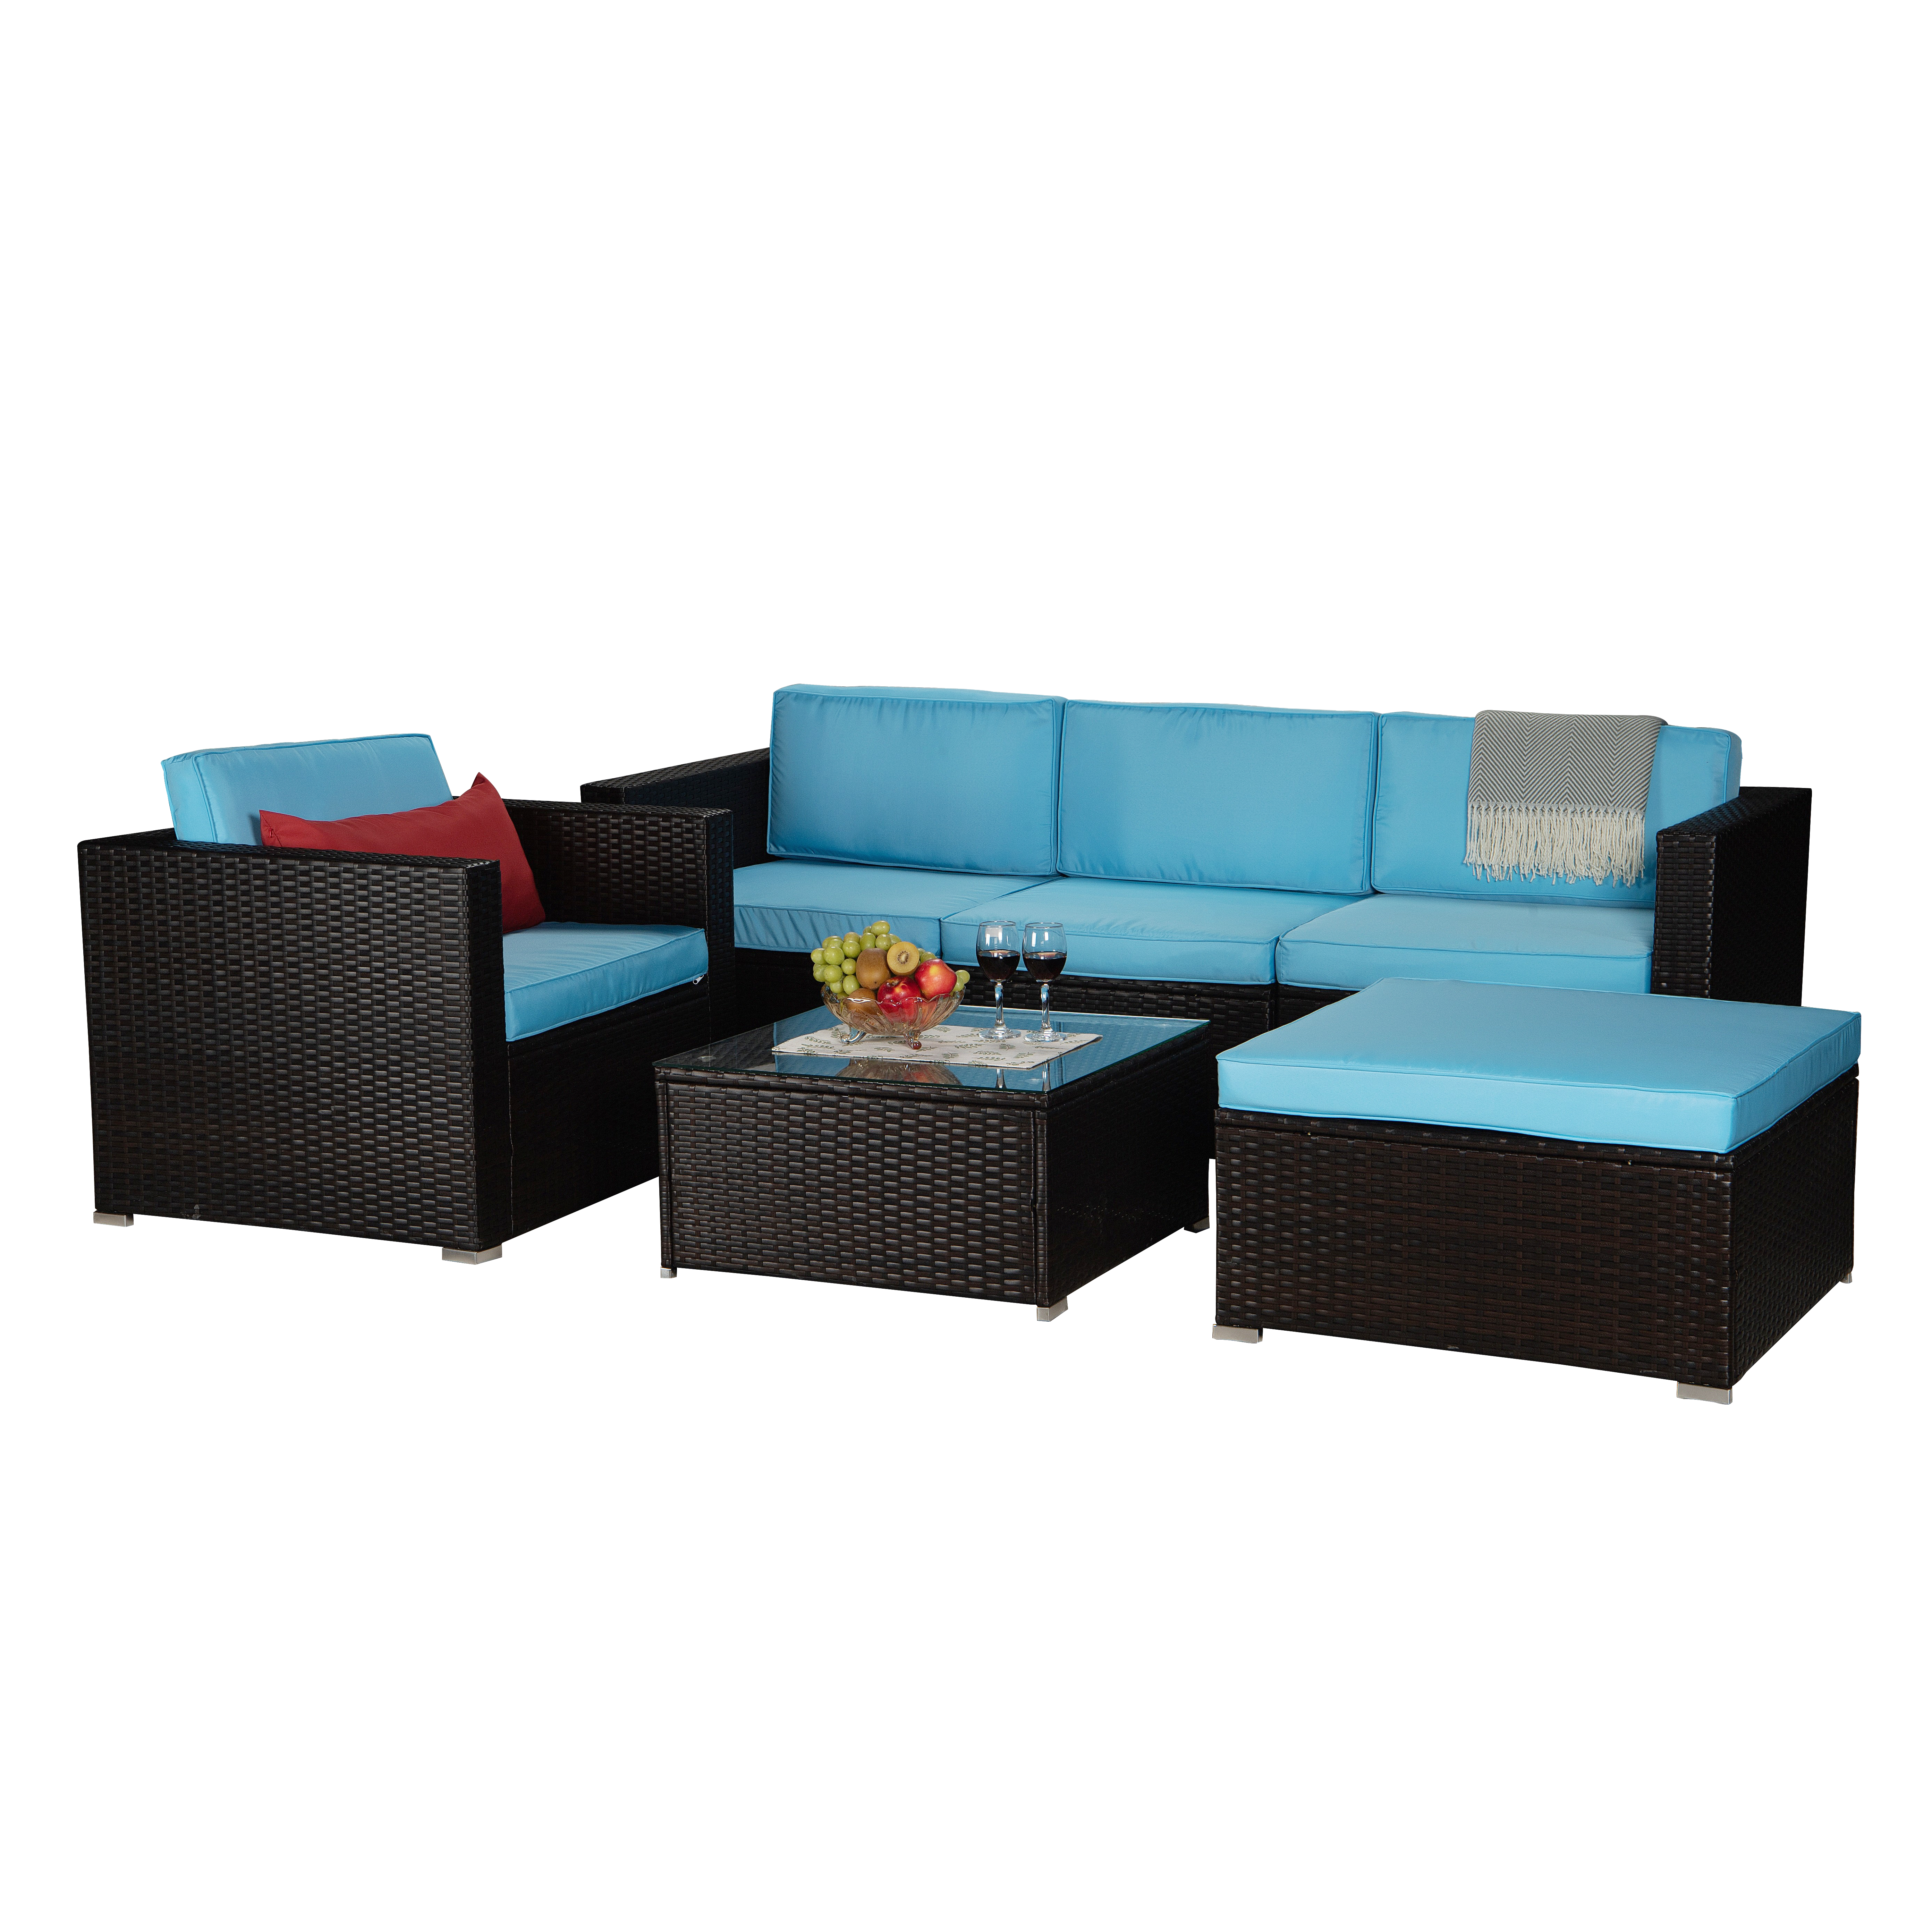 Beefurni Outdoor Garden Patio Furniture 6-Piece Brown PE Rattan Wicker Sectional Blue Cushioned Sofa Sets with 1 Red Pillow-Boyel Living